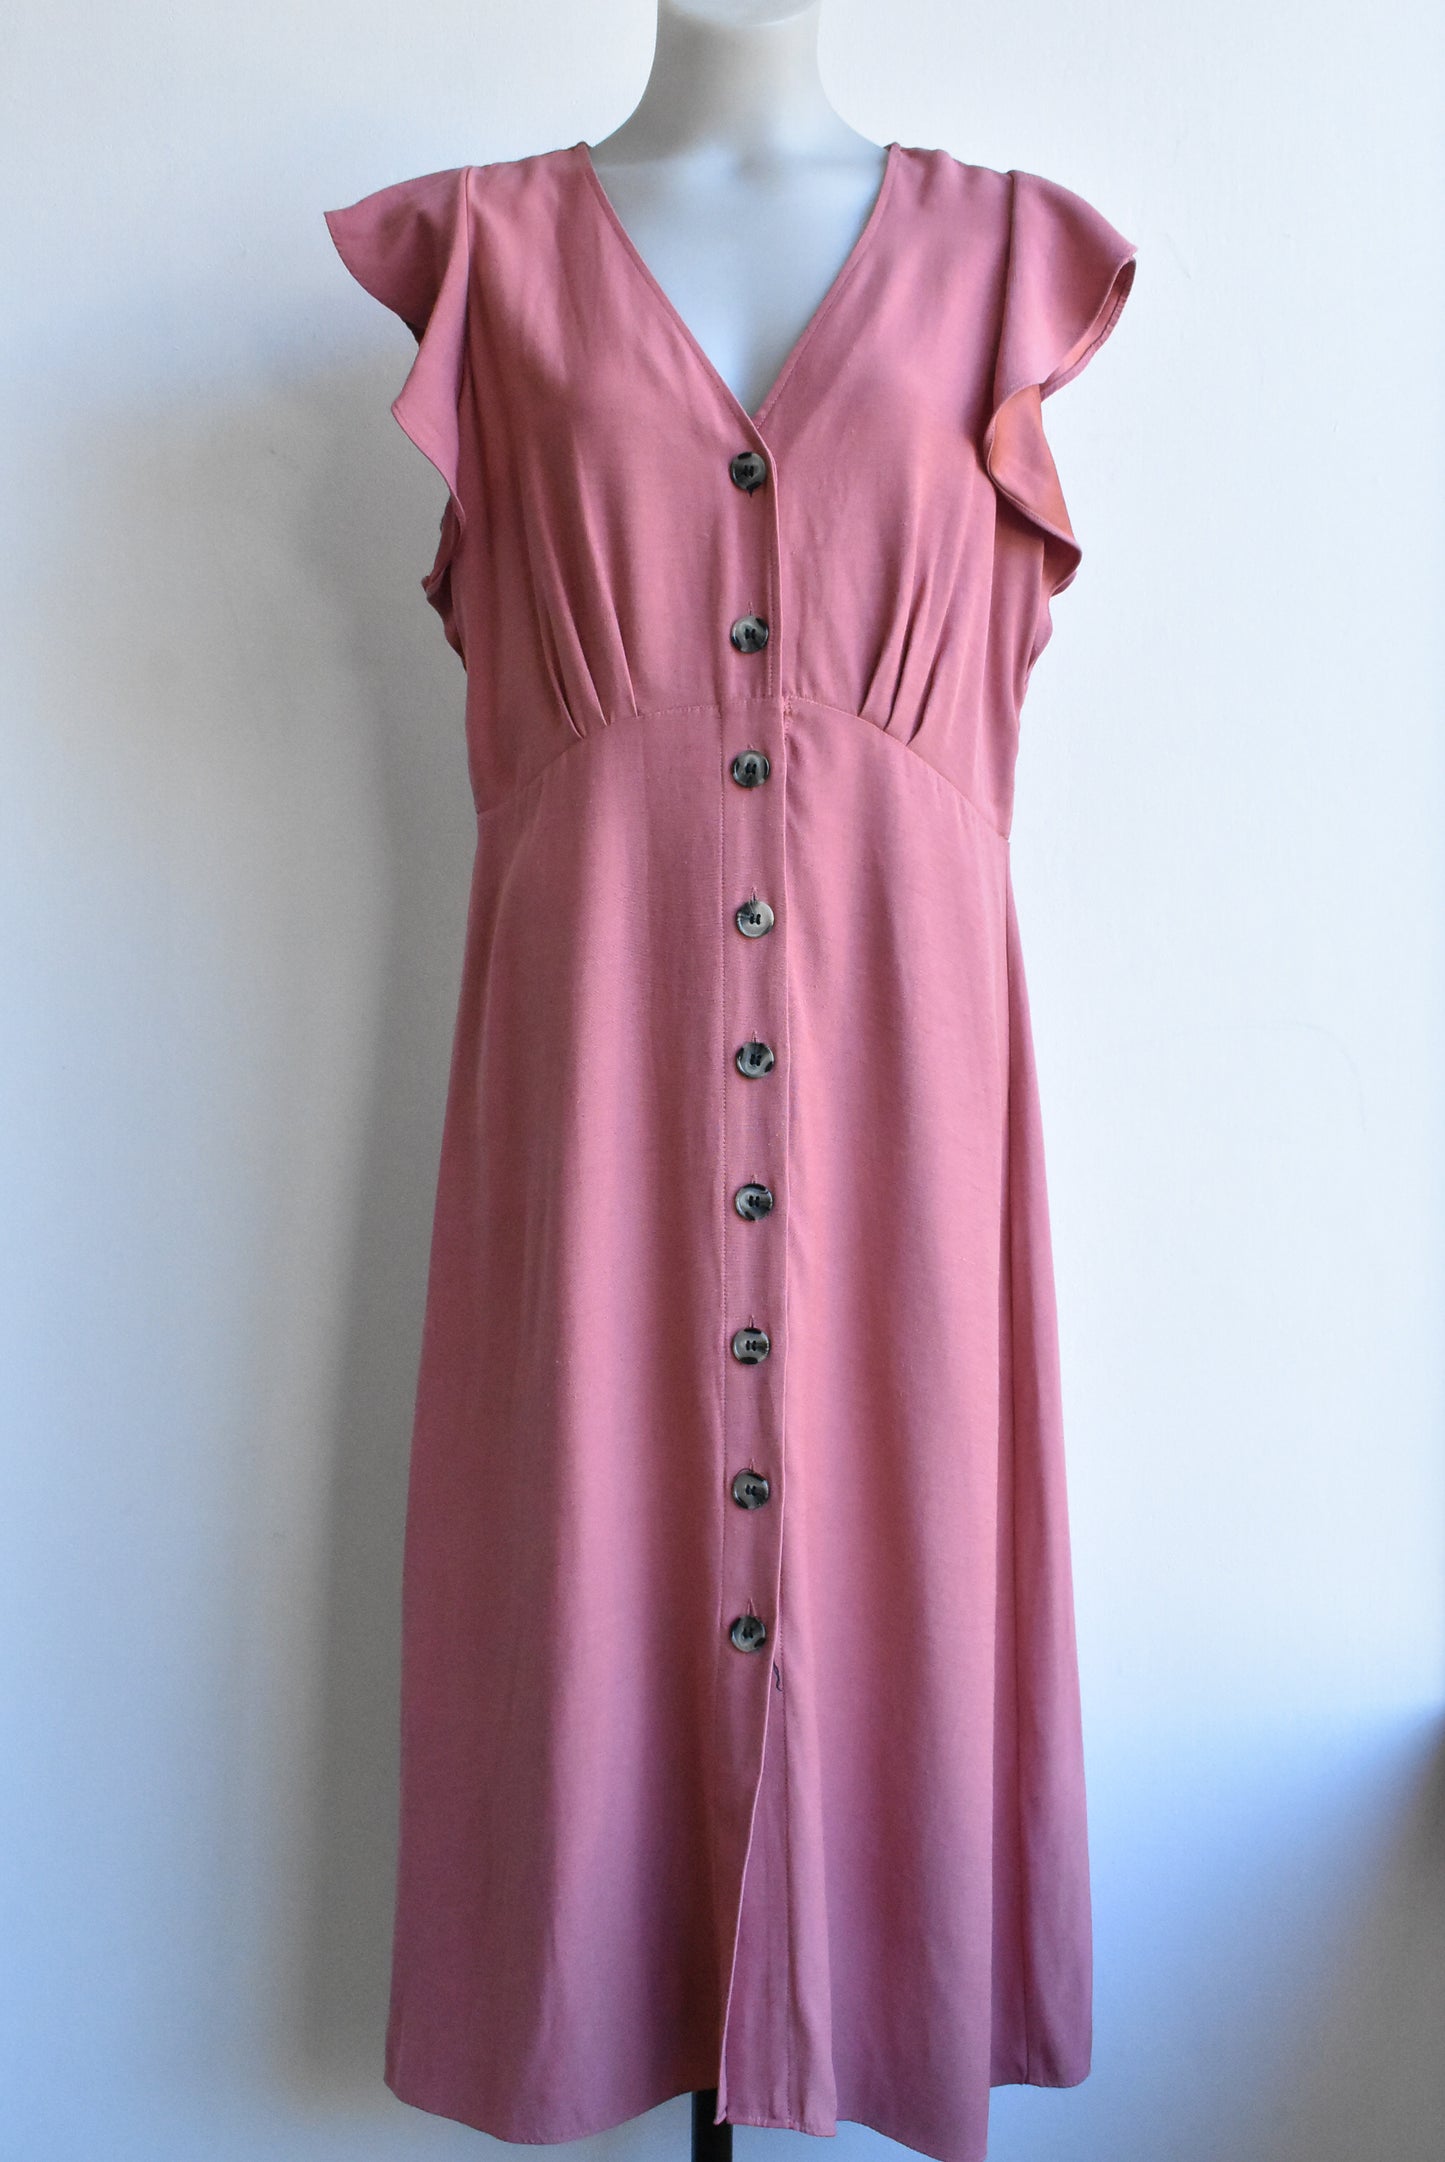 Witchery pink buttoned dress, size 12